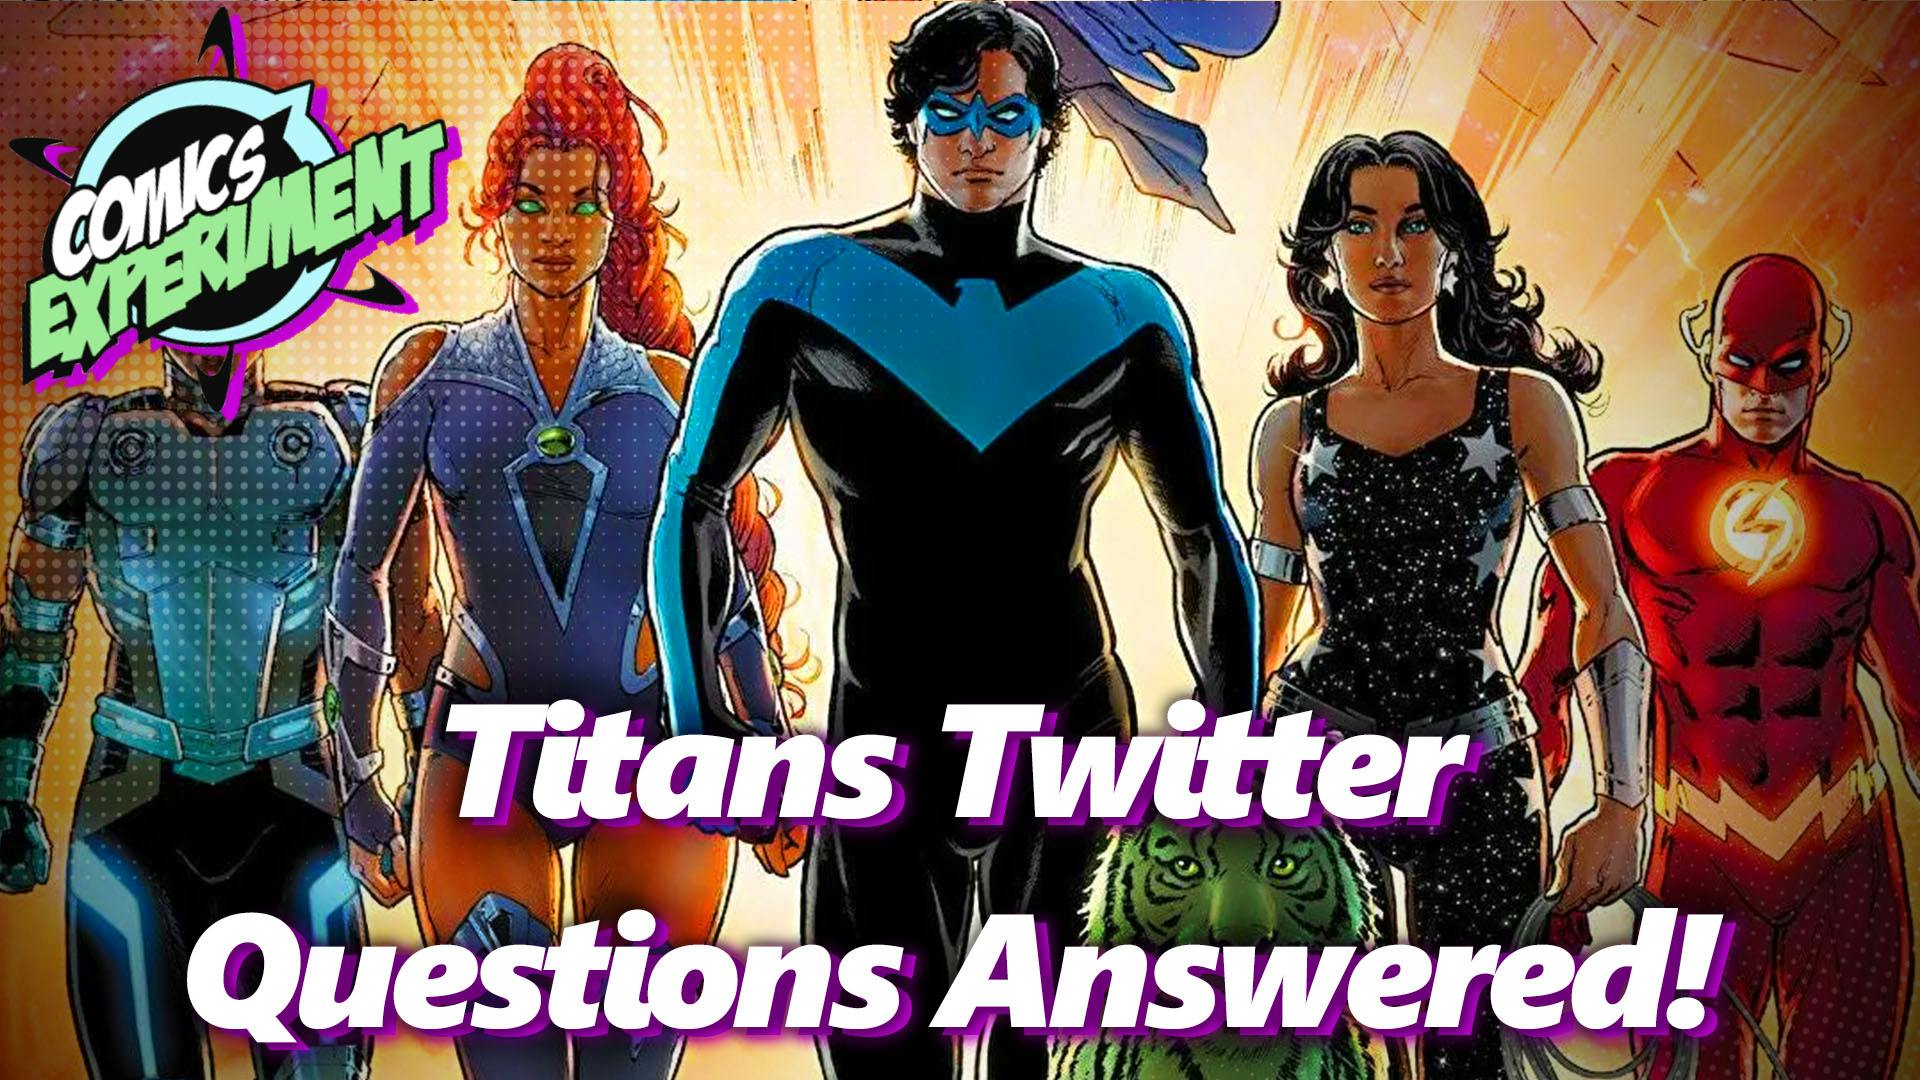 Titans Biggest Questions, ANSWERED!